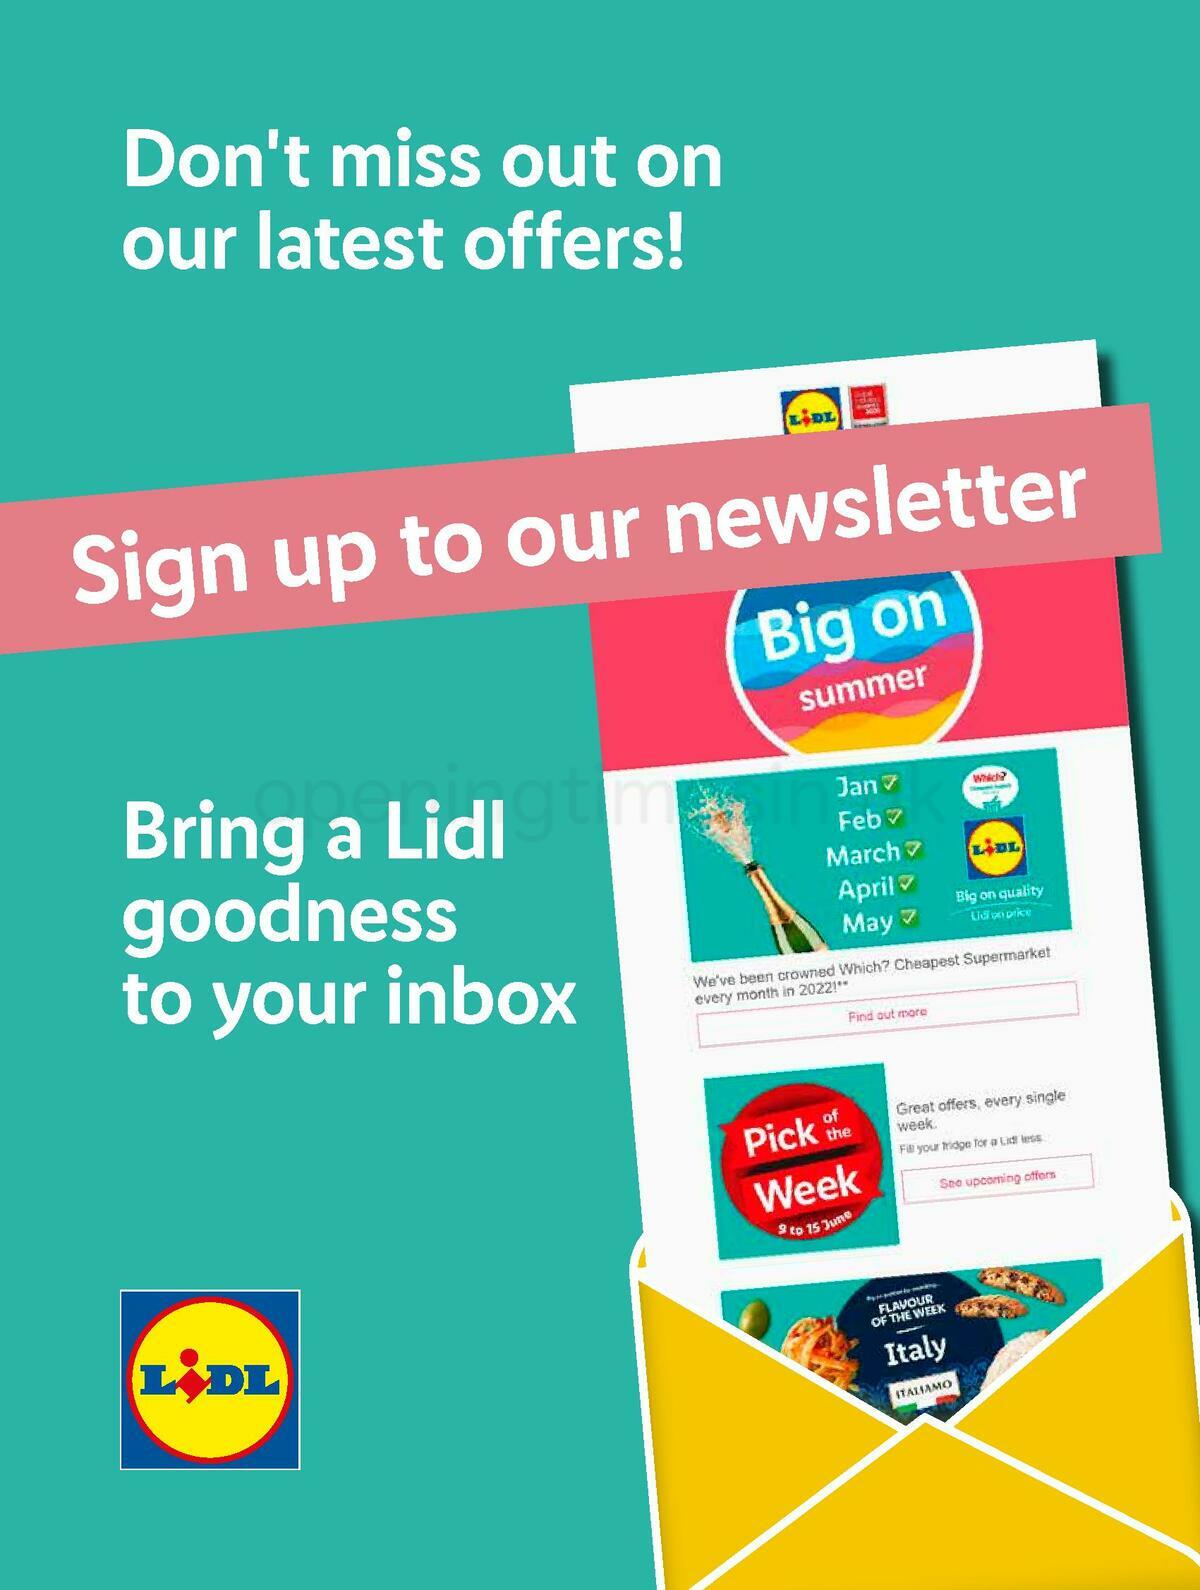 LIDL Offers from 22 September